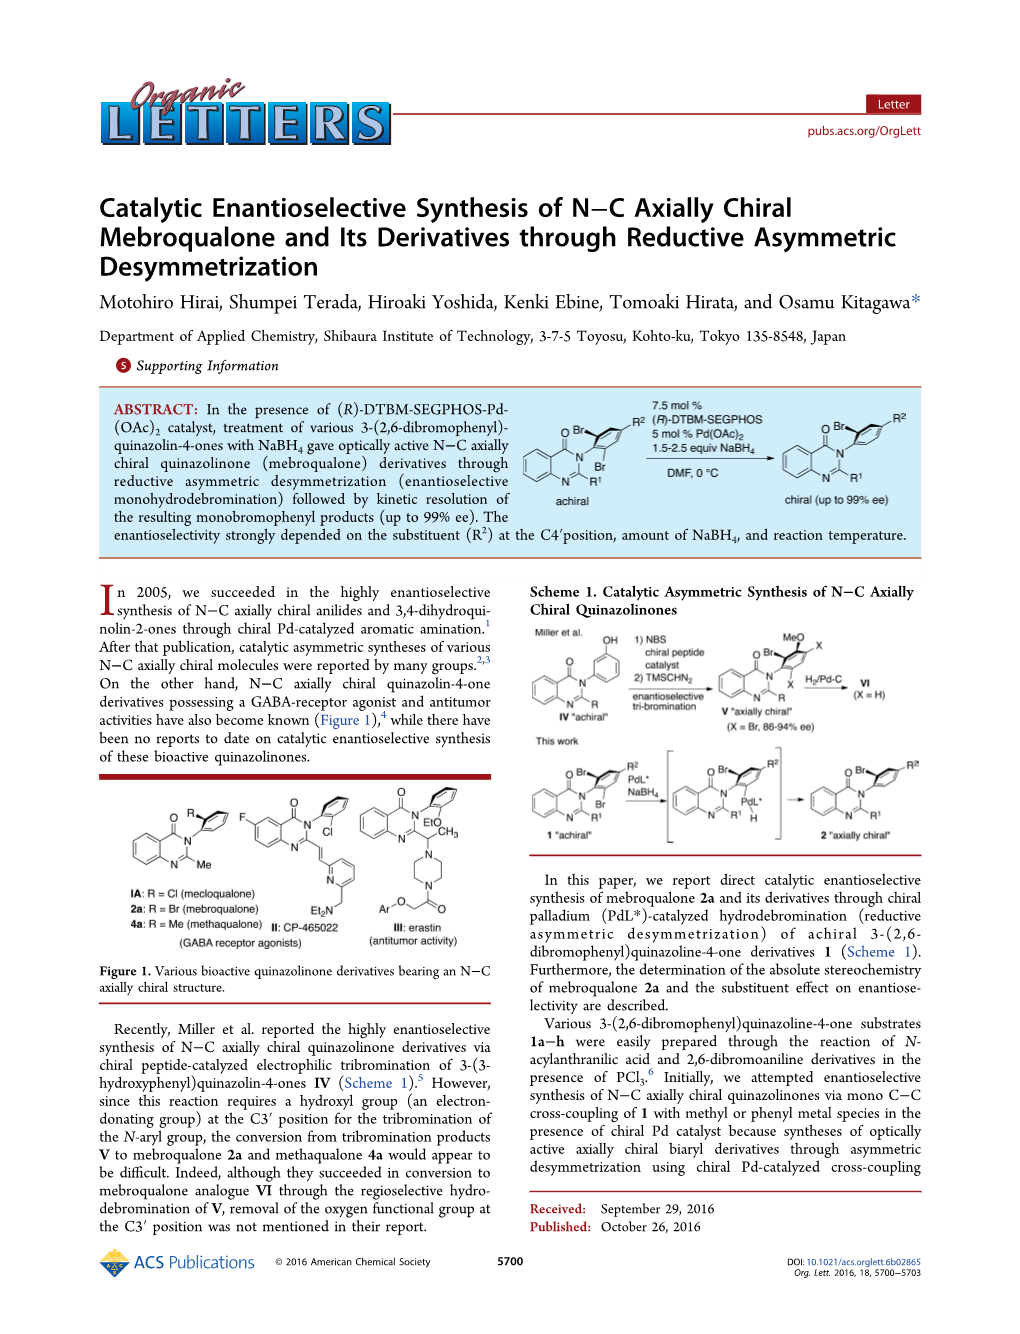 Catalytic Enantioselective Synthesis of N−C Axially Chiral Mebroqualone